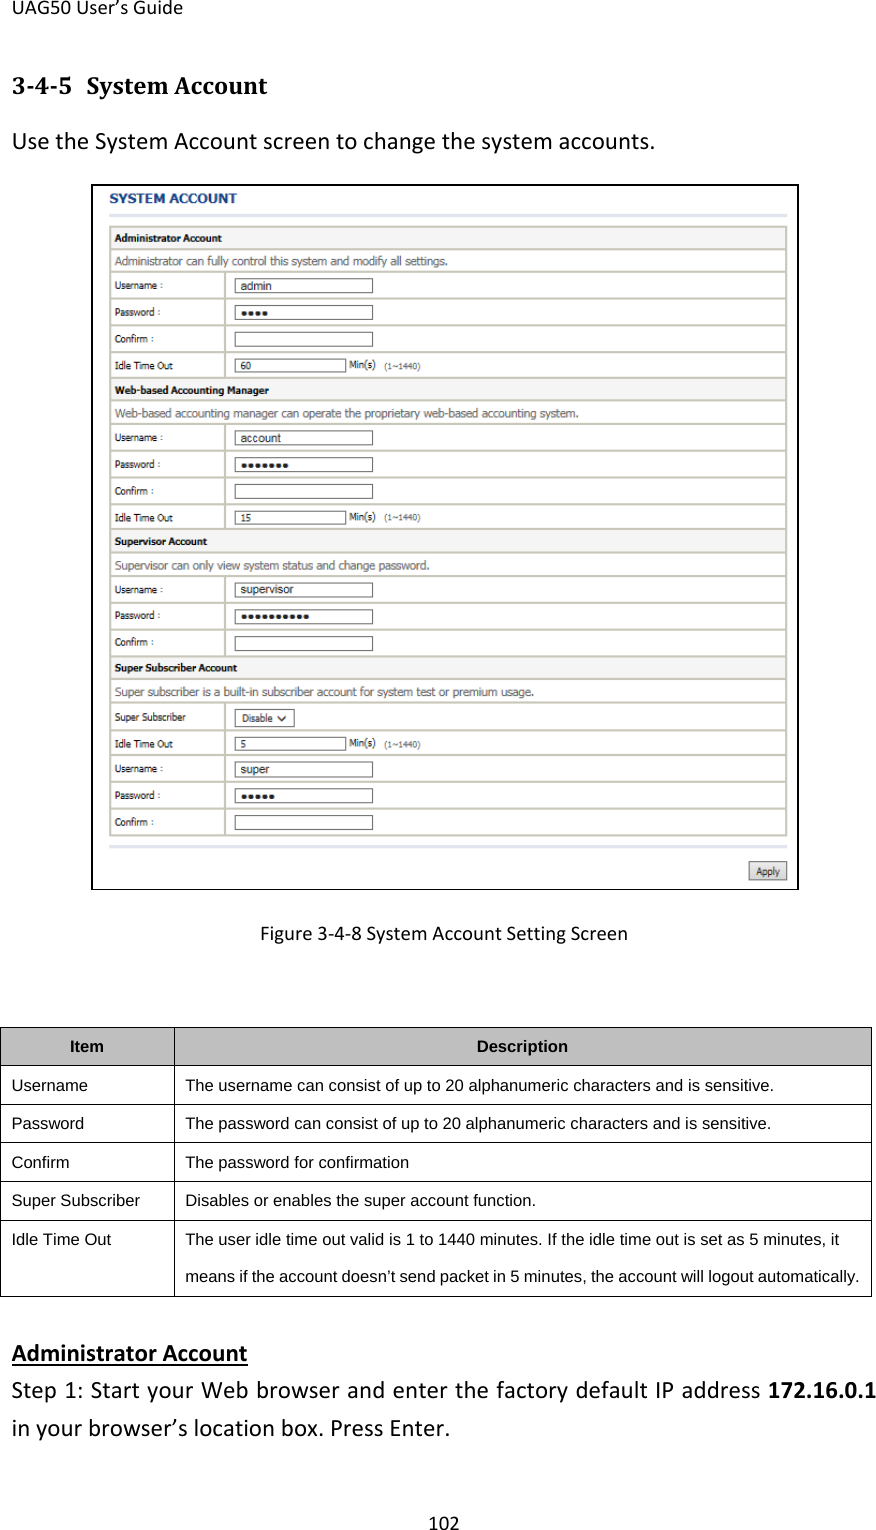 UAG50 User’s Guide 102 3-4-5 System Account Use the System Account screen to change the system accounts.  Figure 3-4-8 System Account Setting Screen  Item Description Username The username can consist of up to 20 alphanumeric characters and is sensitive. Password The password can consist of up to 20 alphanumeric characters and is sensitive. Confirm The password for confirmation Super Subscriber Disables or enables the super account function. Idle Time Out The user idle time out valid is 1 to 1440 minutes. If the idle time out is set as 5 minutes, it means if the account doesn’t send packet in 5 minutes, the account will logout automatically.  Step 1: Start your Web browser and enter the factory default IP address 172.16.0.1 in your browser’s location box. Press Enter. Administrator Account 